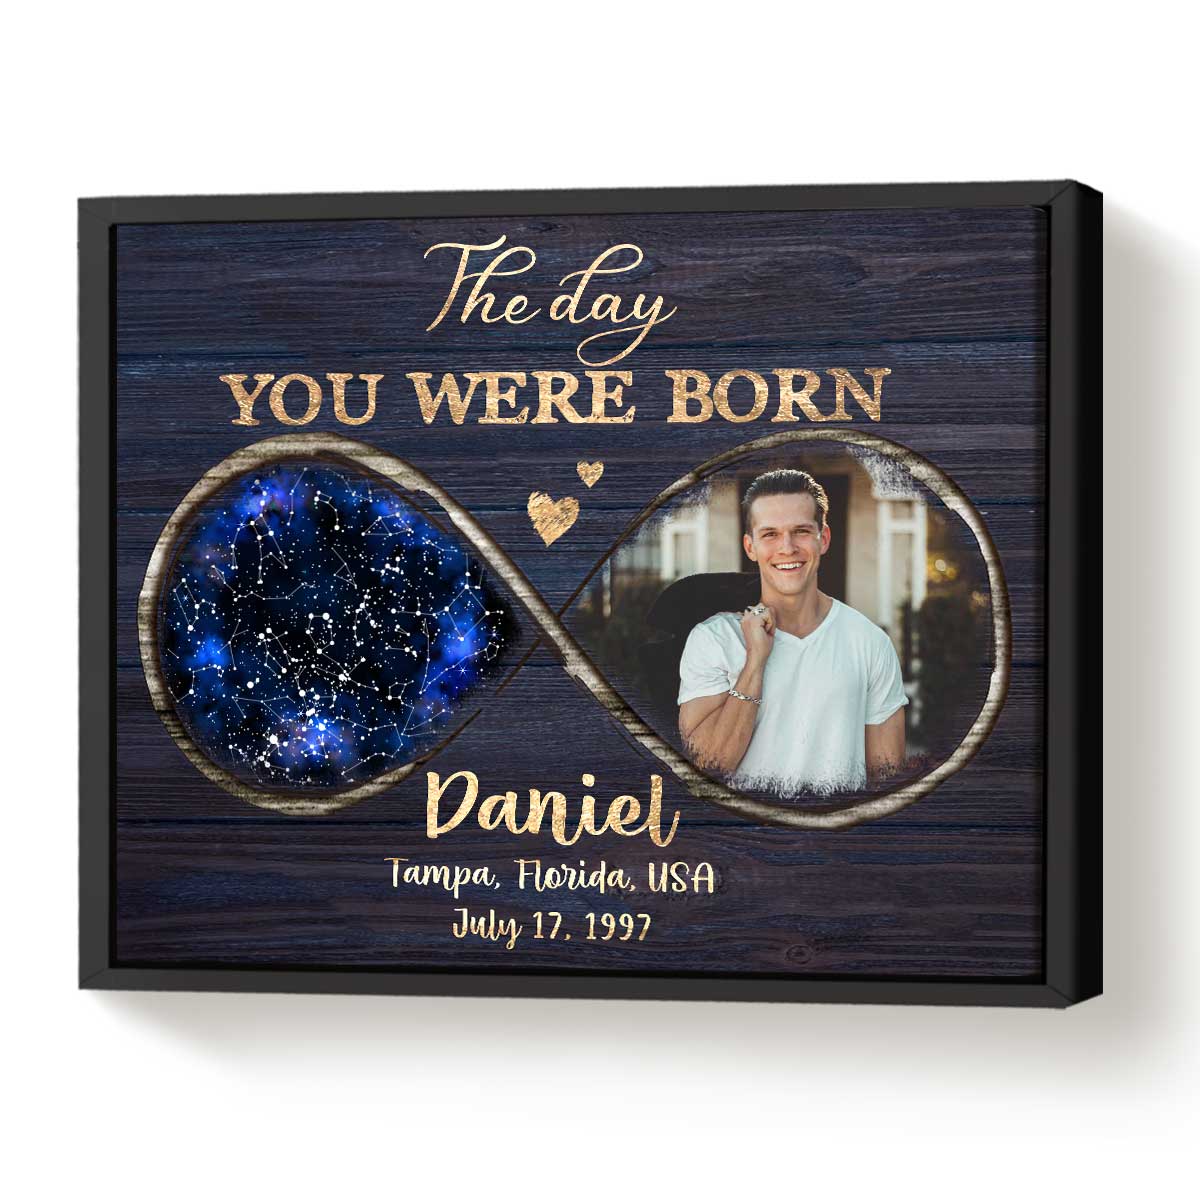 2 Year Anniversary Gift for Him, Personalize Second Anniversary Gift for  Husband, 2nd Anniversary Gift for Boyfriend, Custom Photo Collage - Etsy |  Boyfriend anniversary gifts, 2 year anniversary gifts for him, Cute  anniversary gifts